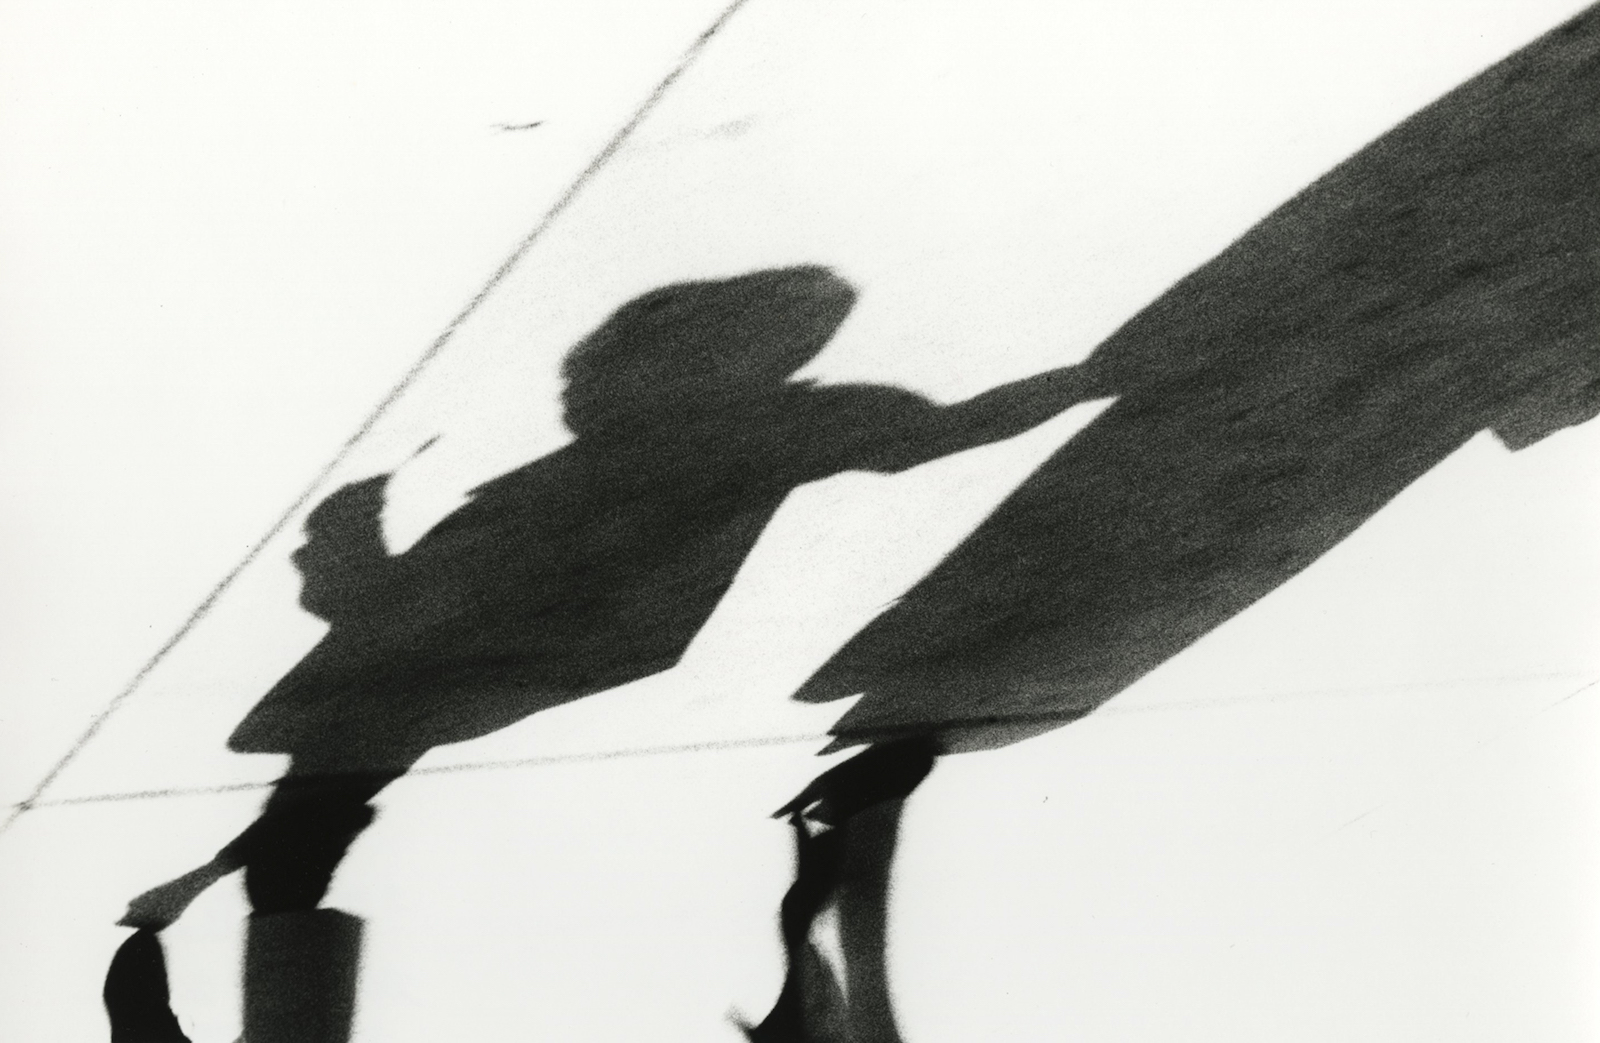 Woman and Child, Shadow Series, Chicago, 1951